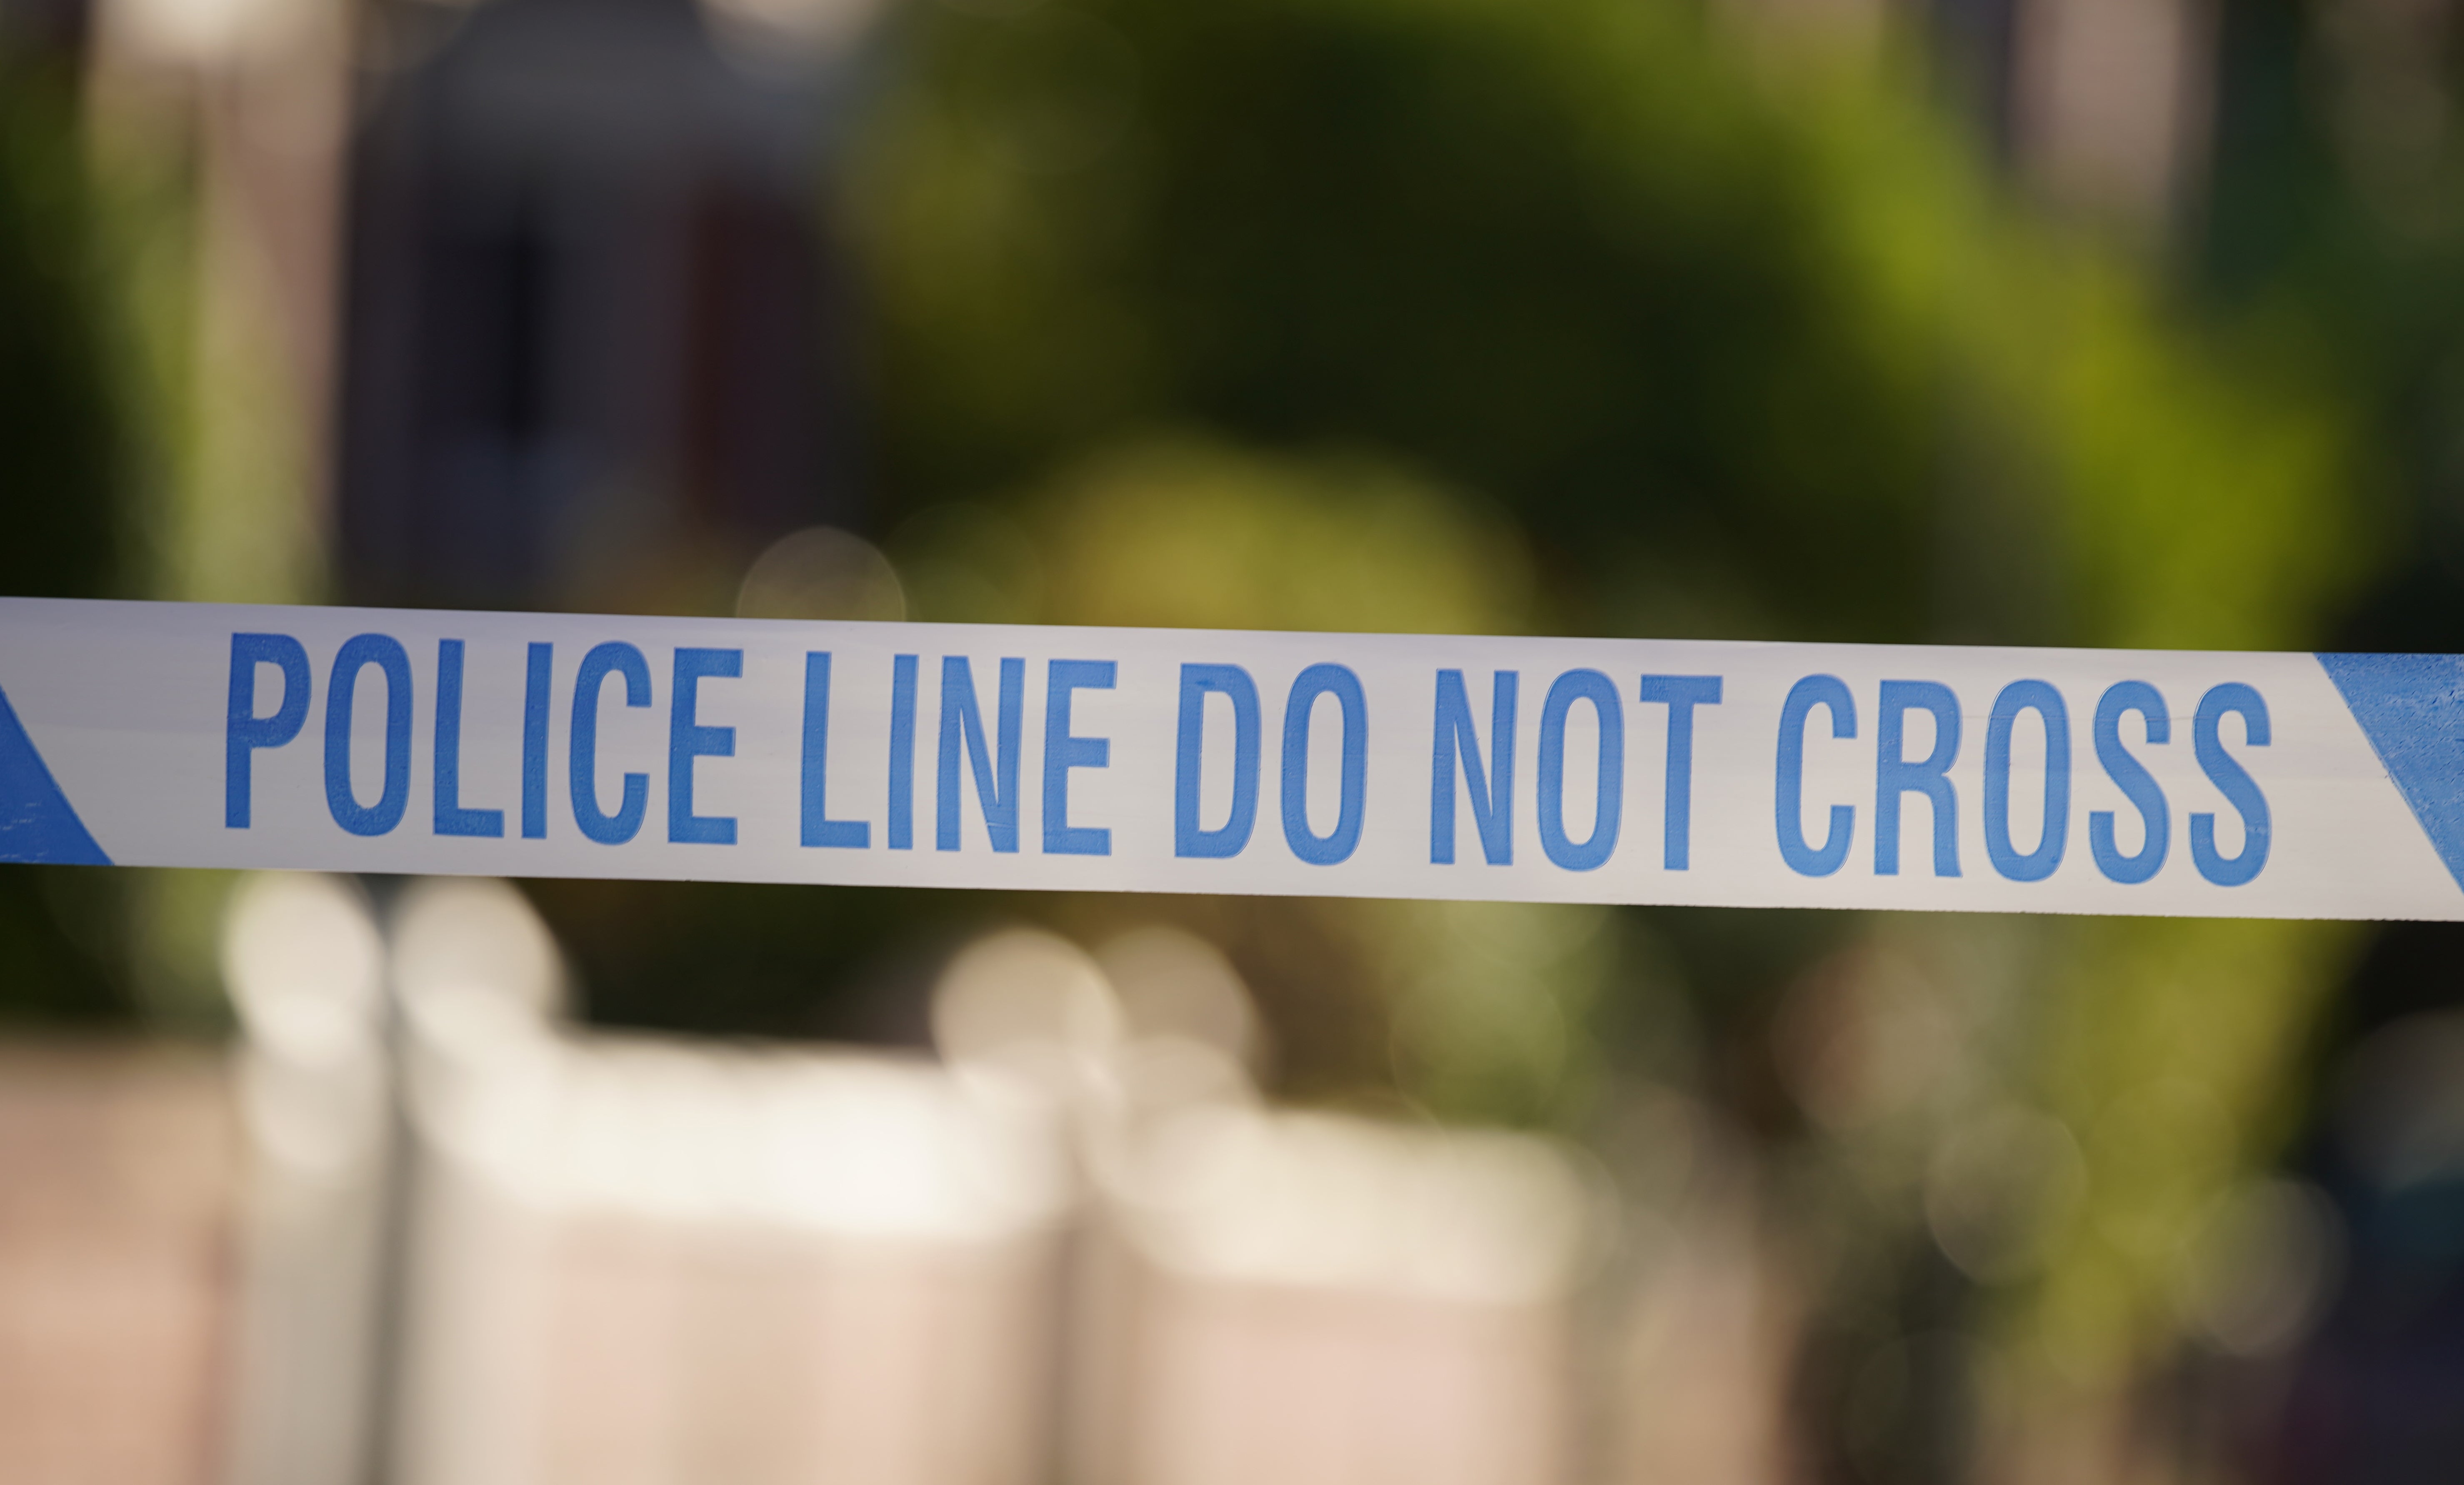 A woman has been arrested on suspicion of neglect after the boy fell from a second-storey window